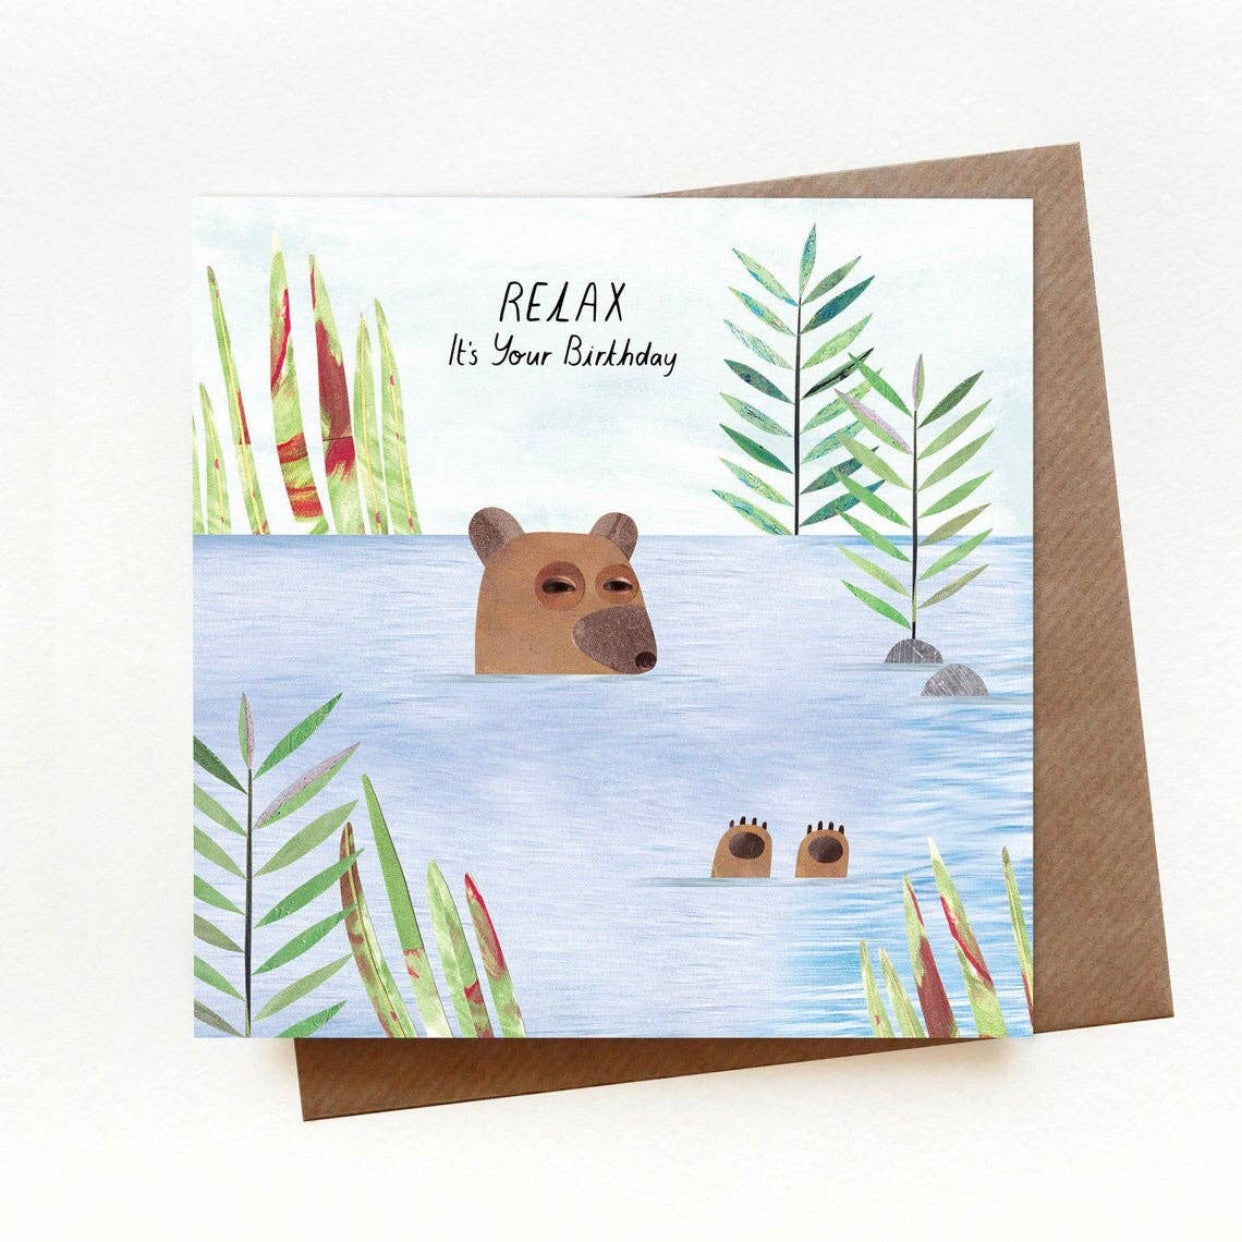 relax it's your birthday greeting card